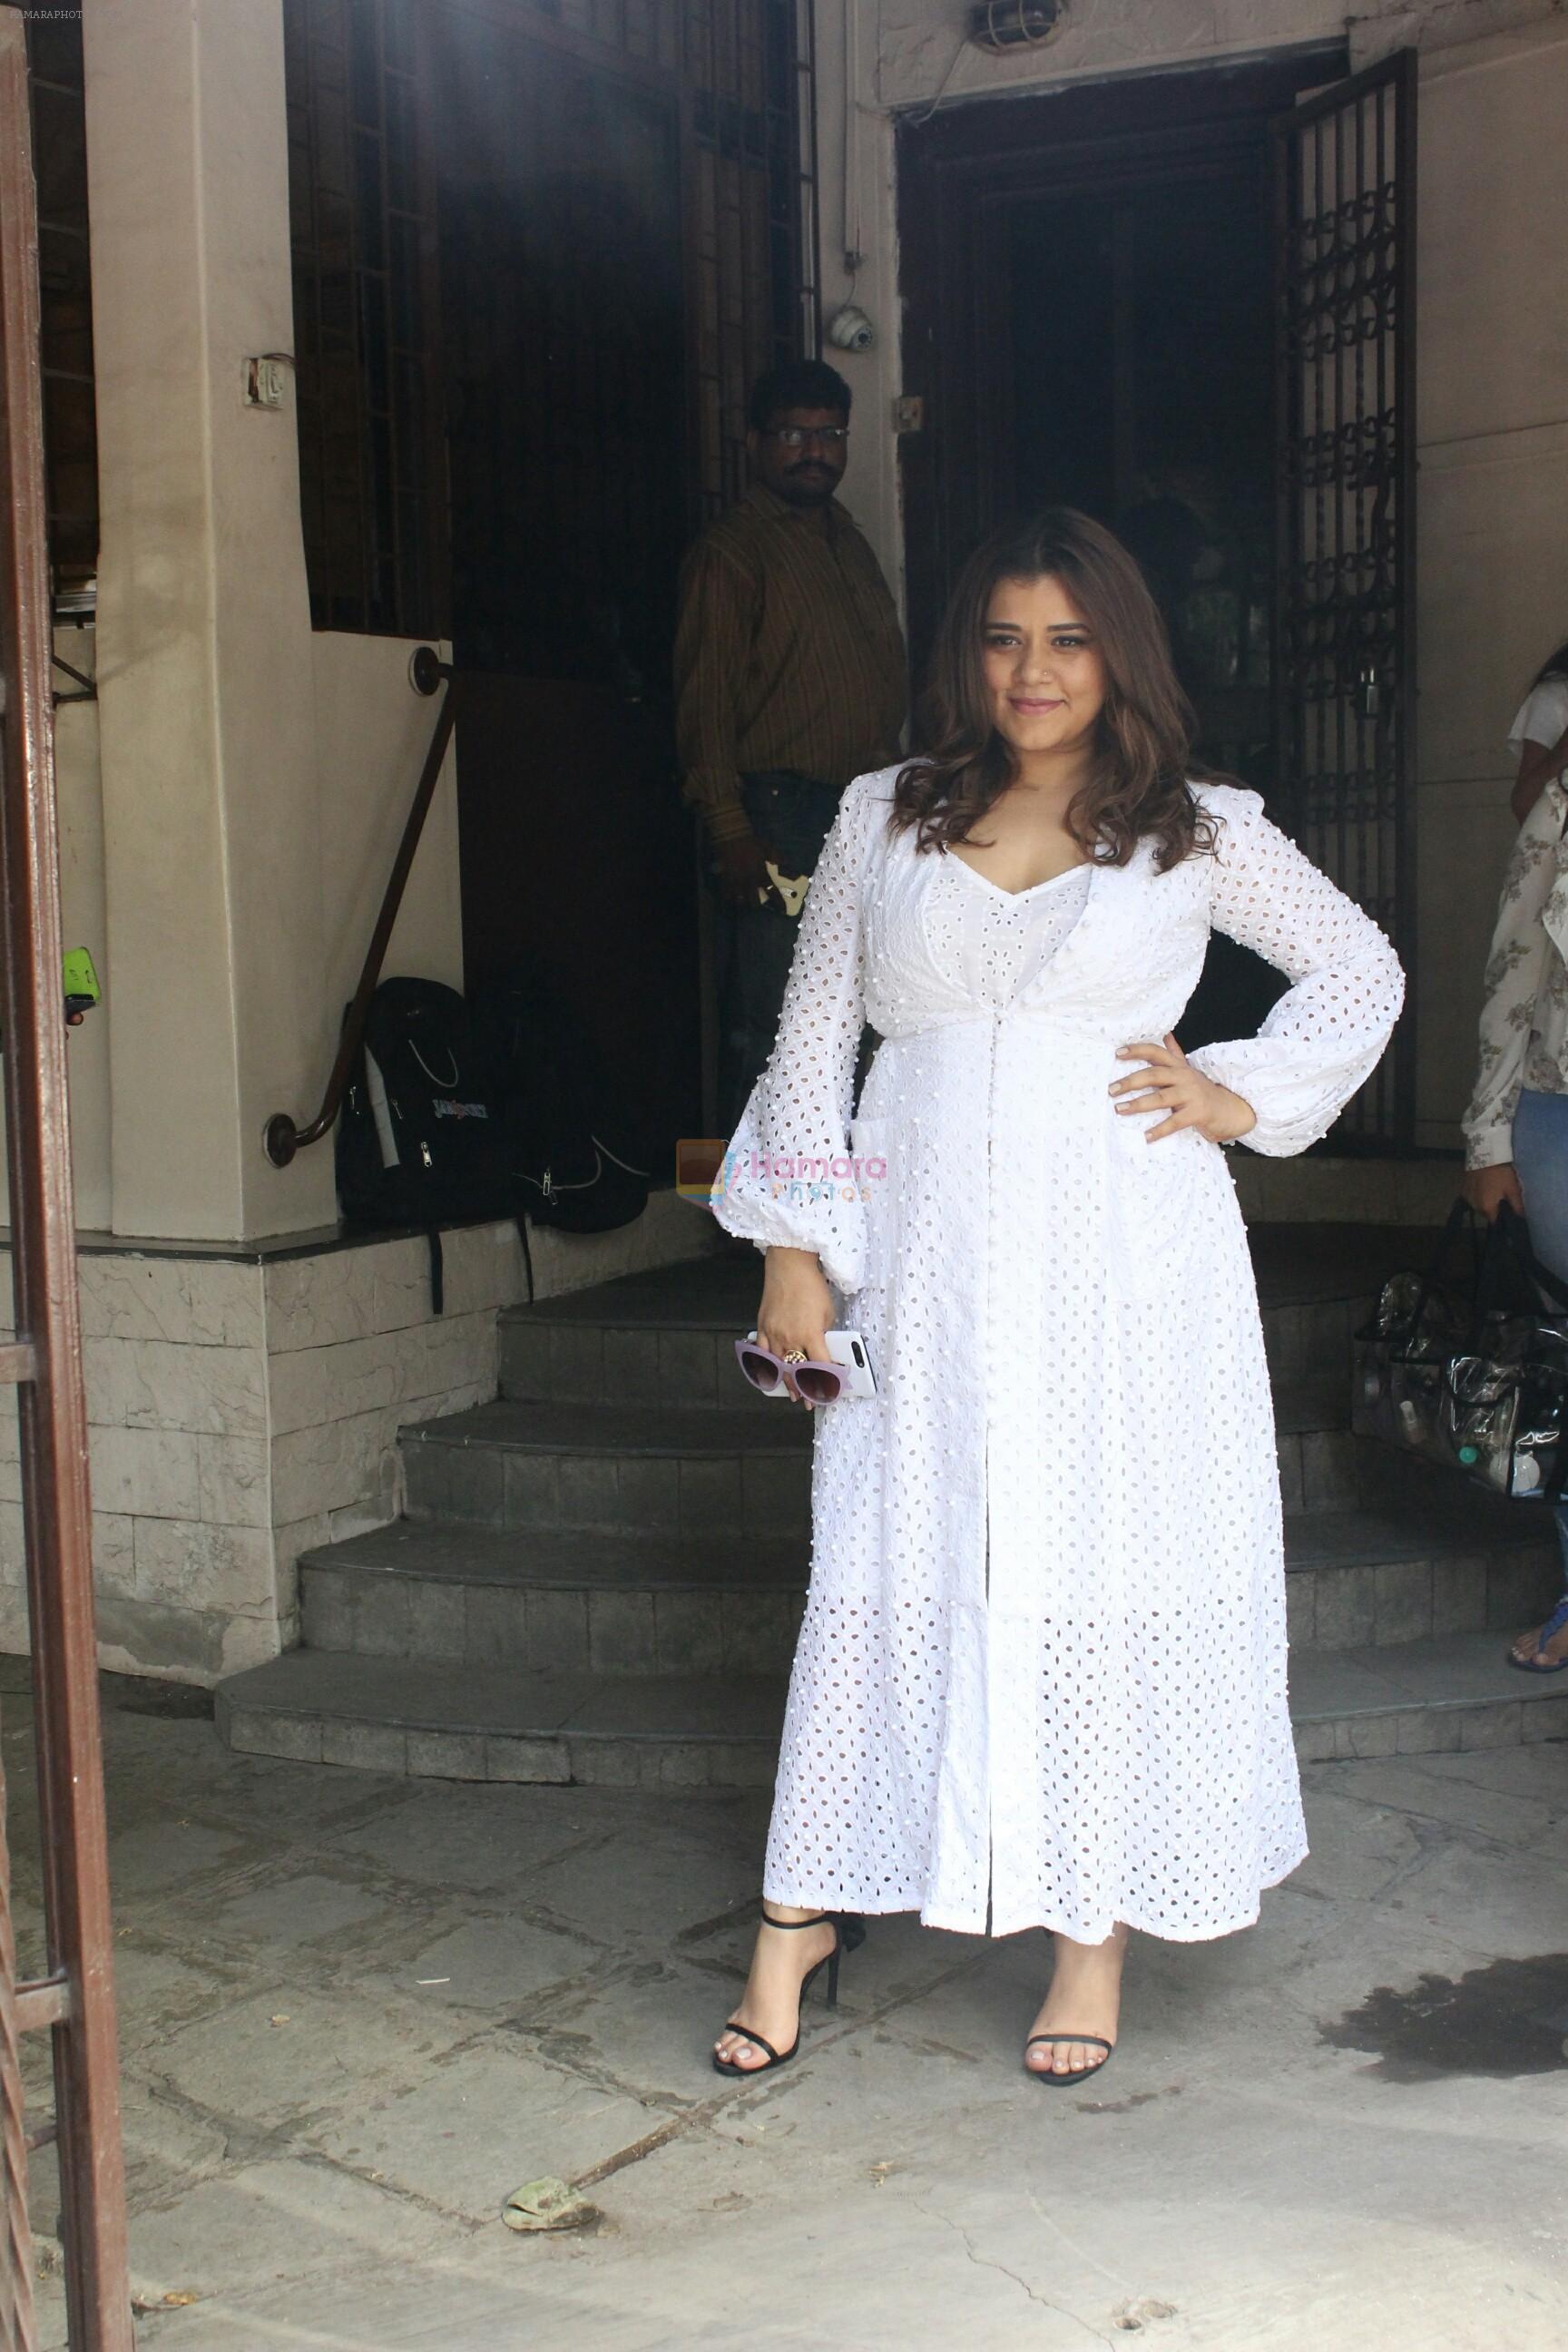 Shikha Talsania with team of Veere Di Wedding spotted at dubbing studio in bandra on 24th May 2018